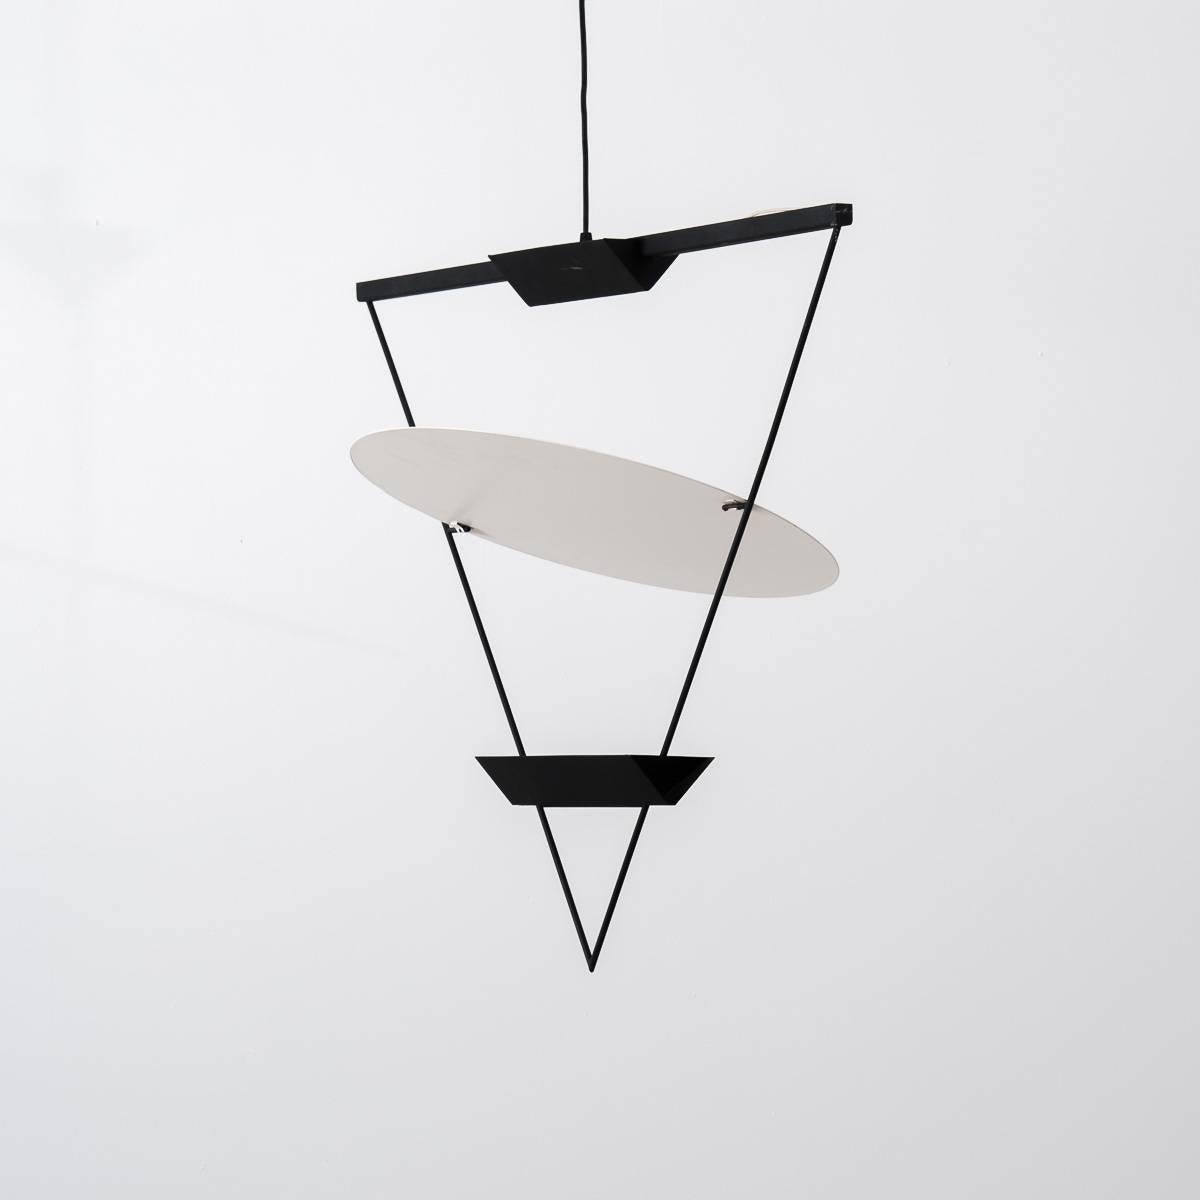 A rare inverted triangle hanging light by Mario Botta for Artemide, 1980s.
A study in geometry and reflection, two Halogen uplighters sit in a triangular frame, offset by a white circular metal reflector that casts ambient light back down into the